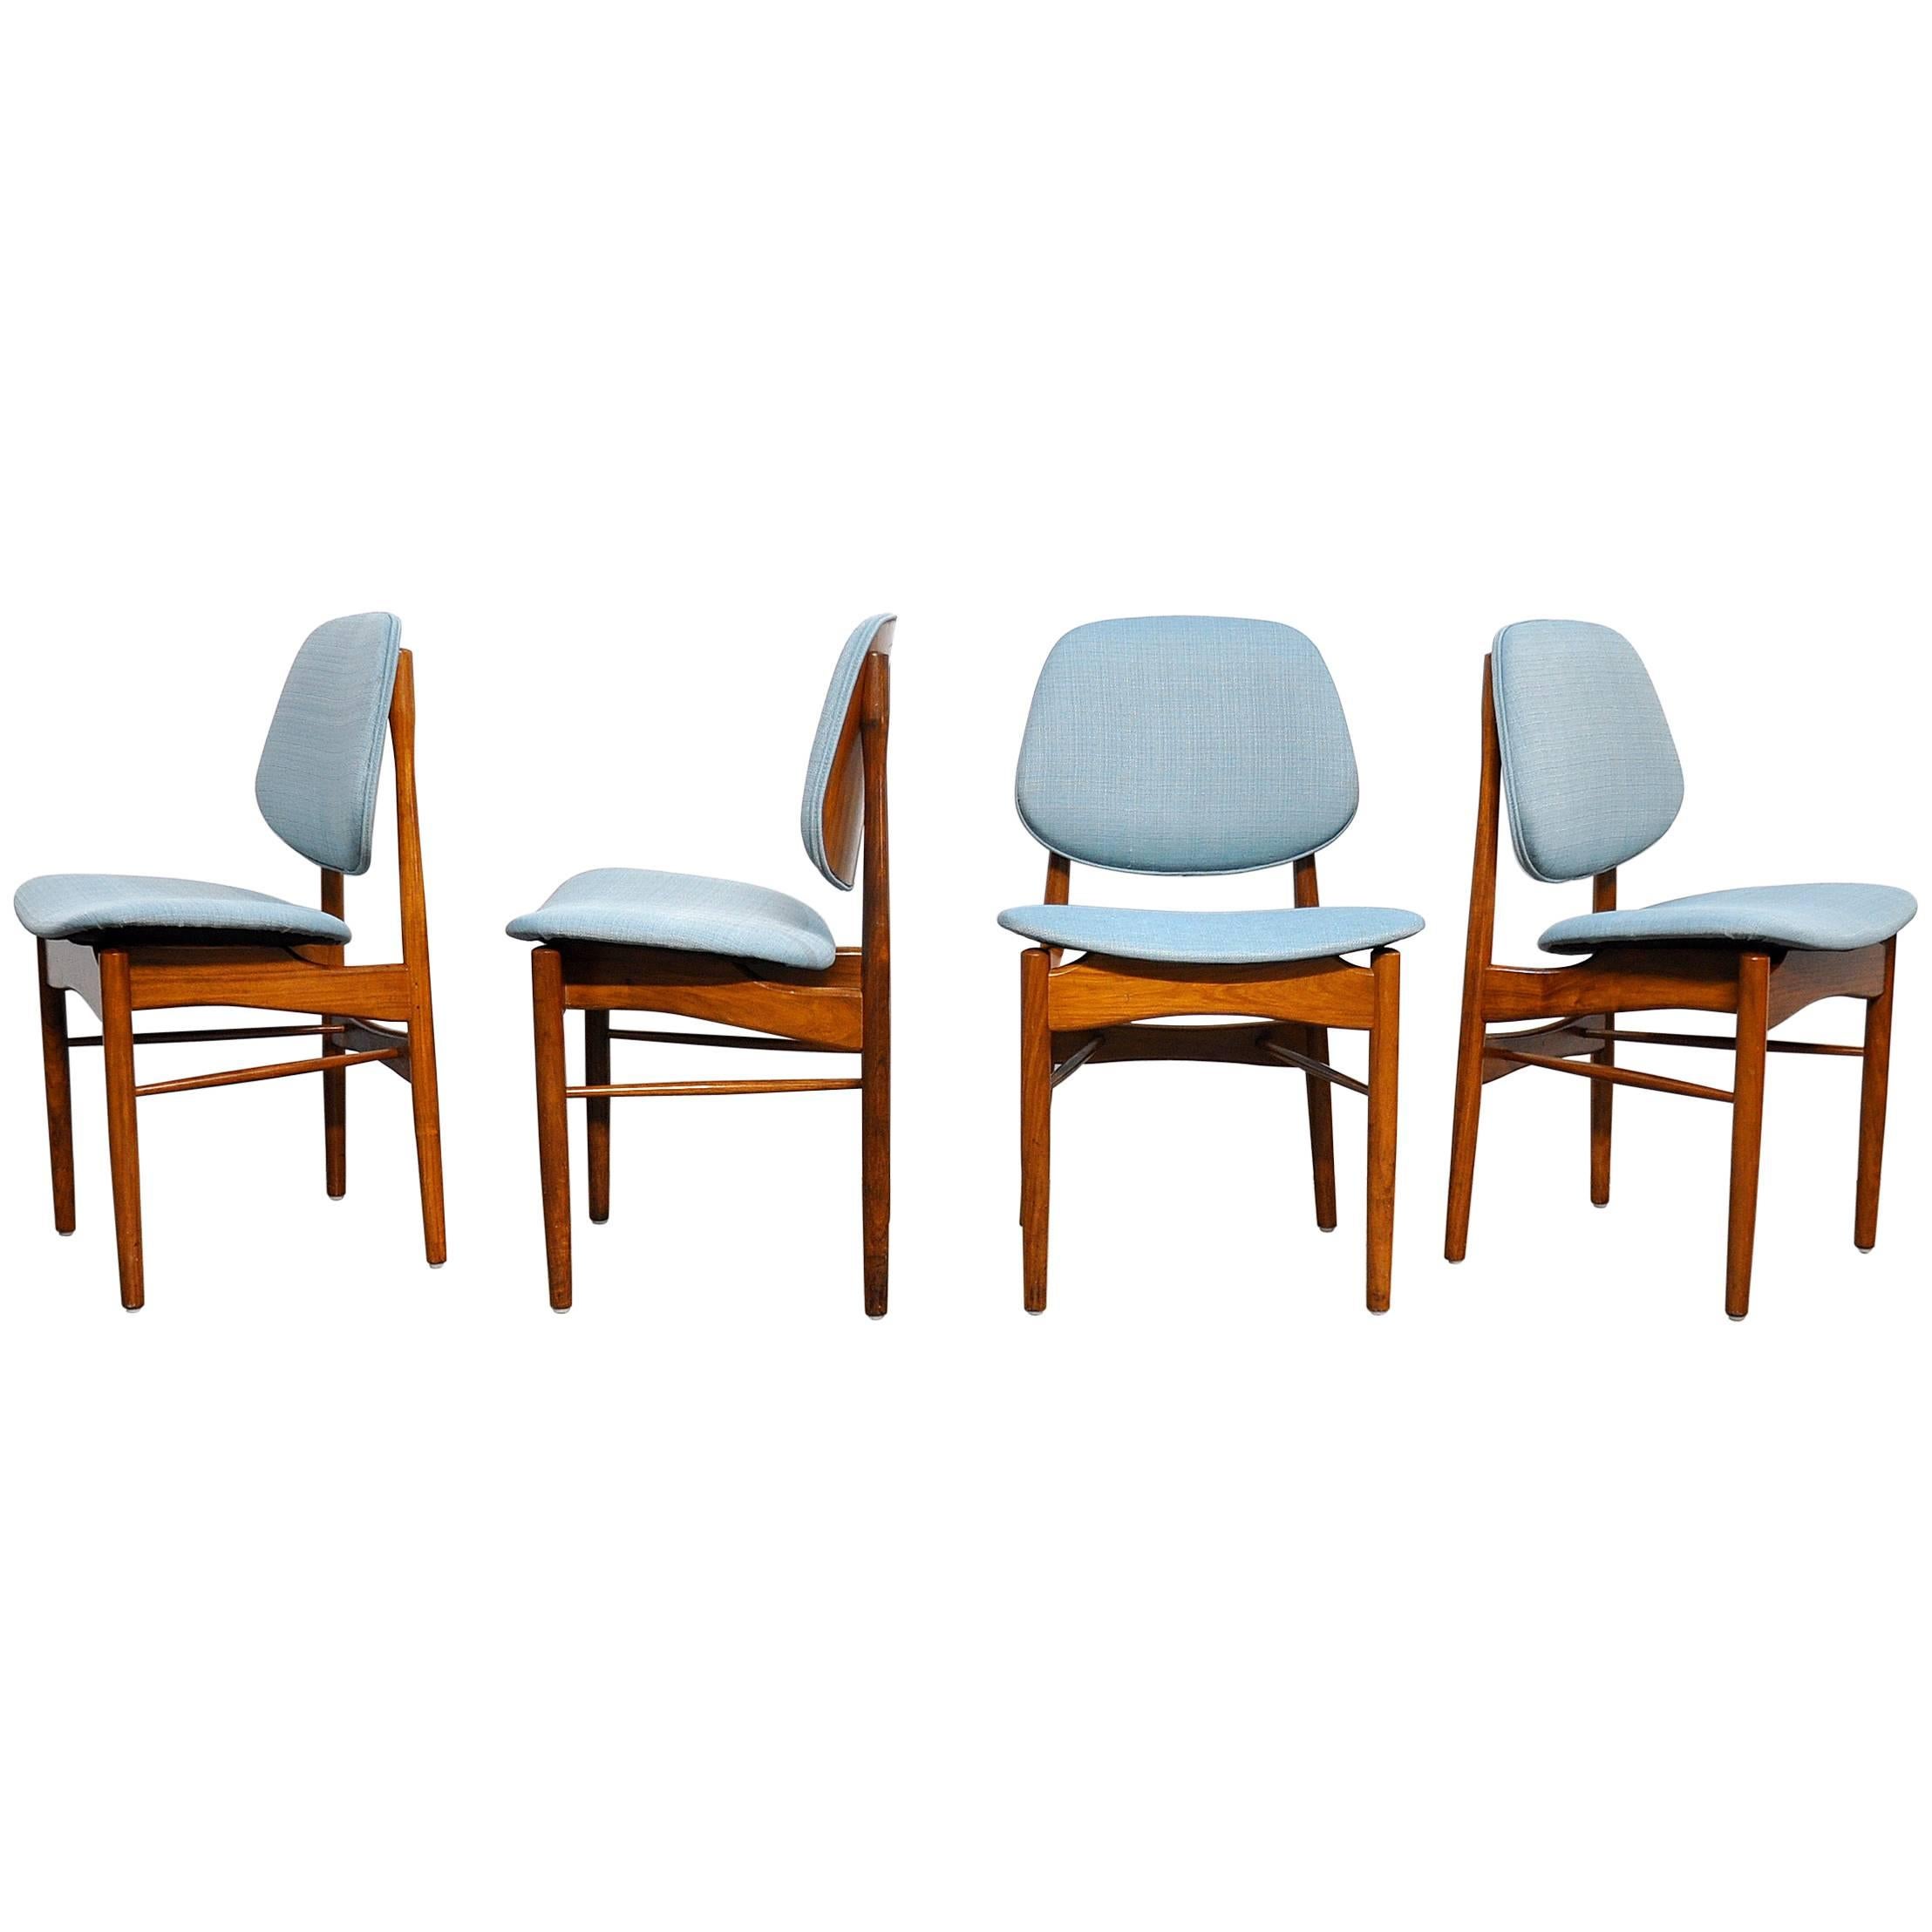 Set of Four Teak Dining Chairs, Attributed to Finn Juhl